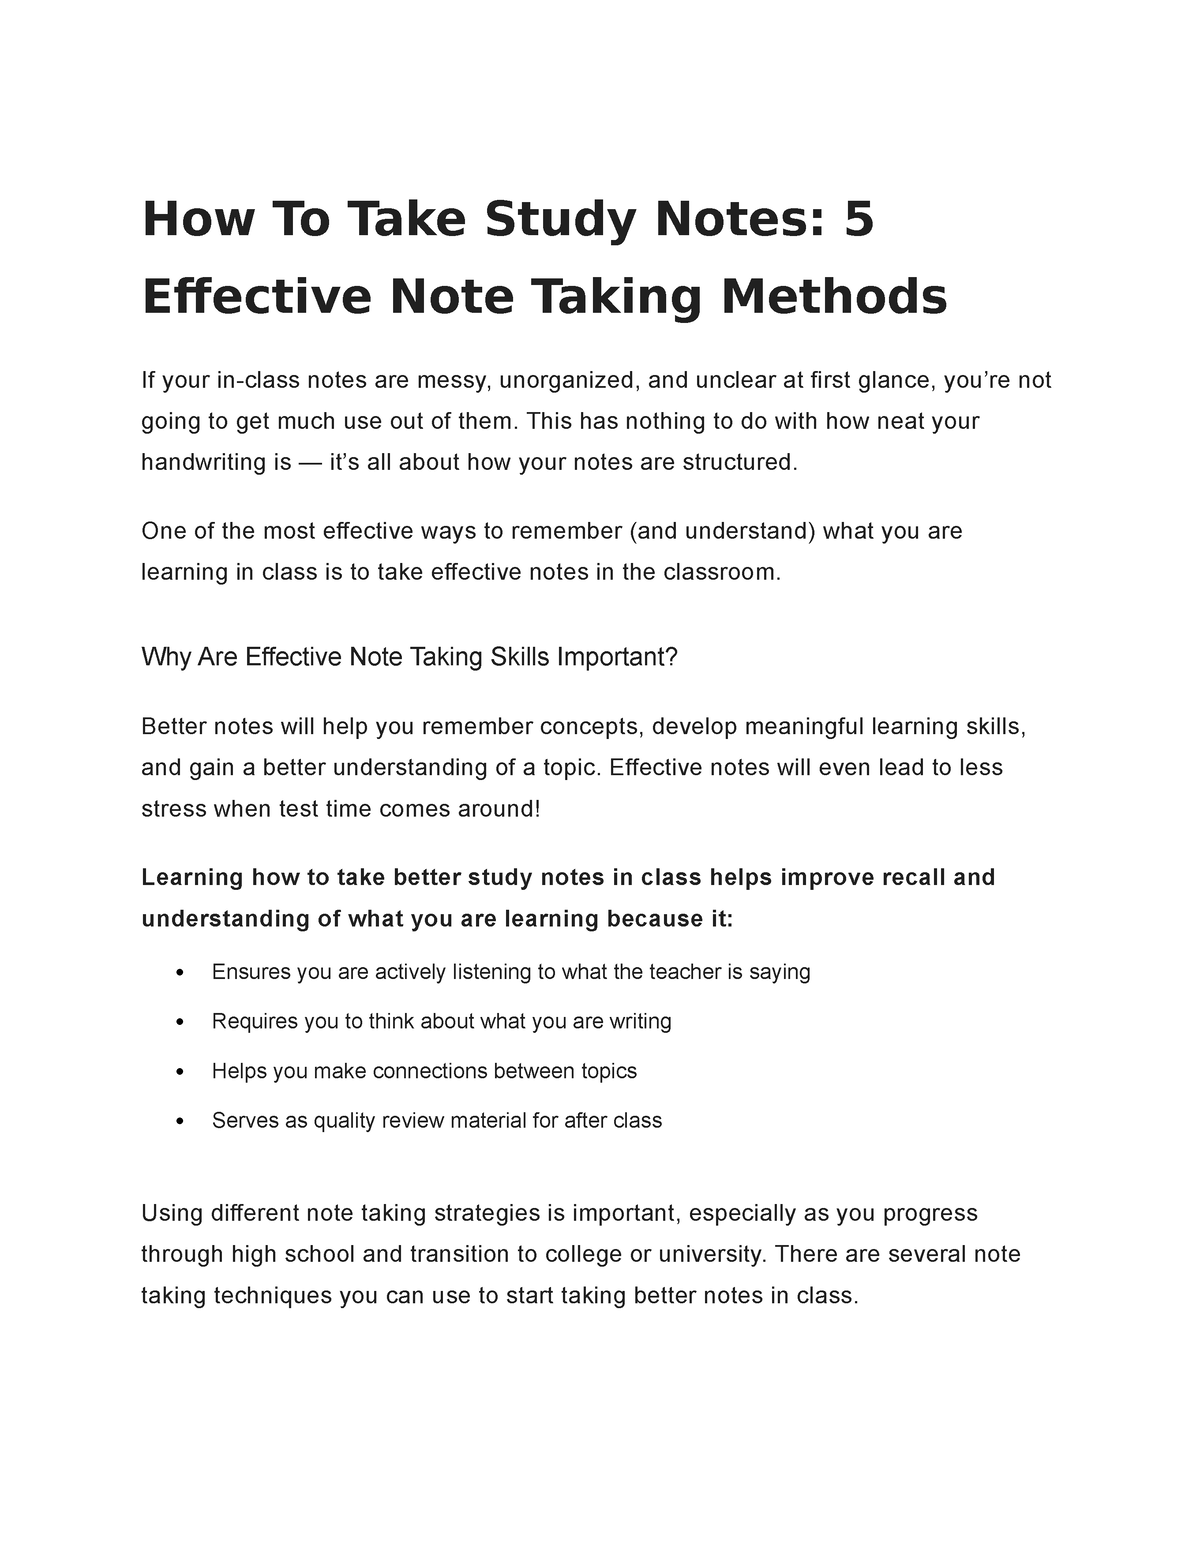 How To Take Study Notes: 5 Effective Note Taking Methods